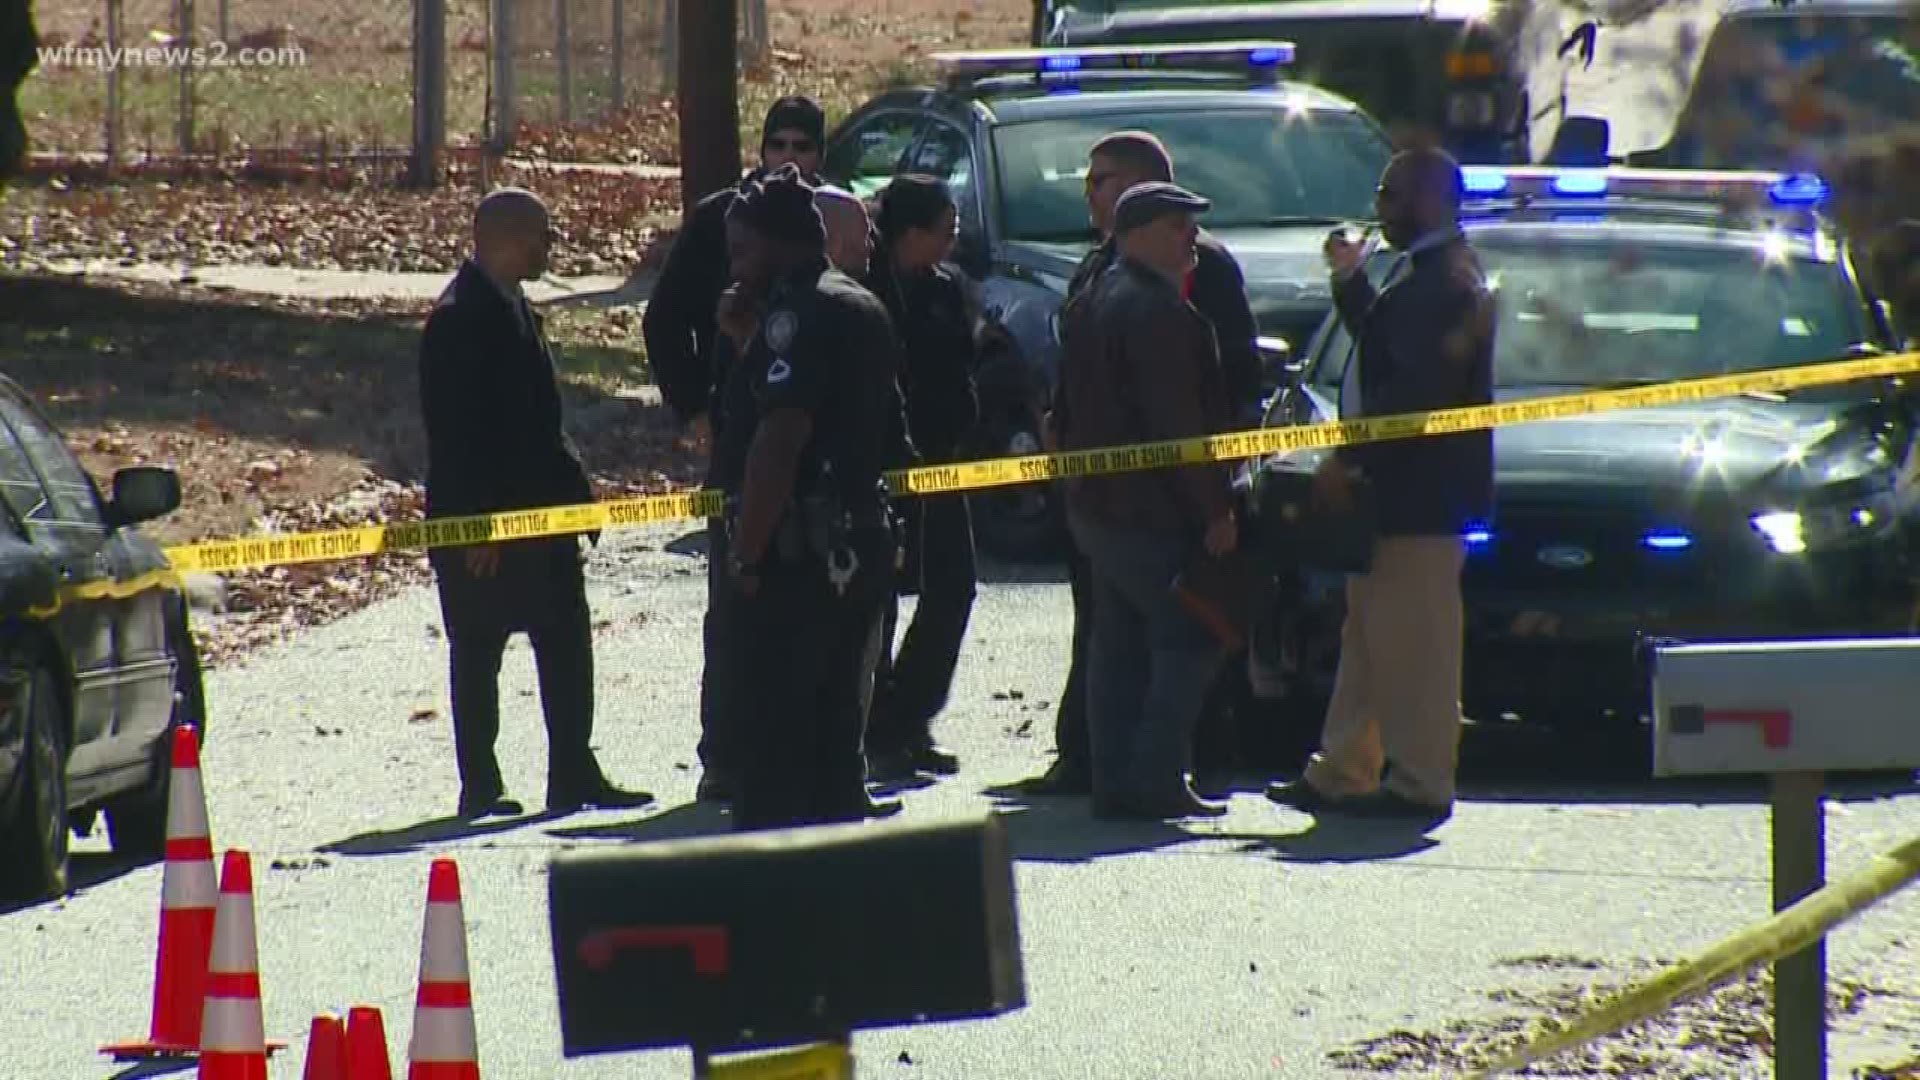 Greensboro police say witnesses told them the suspect was driving a dark car.